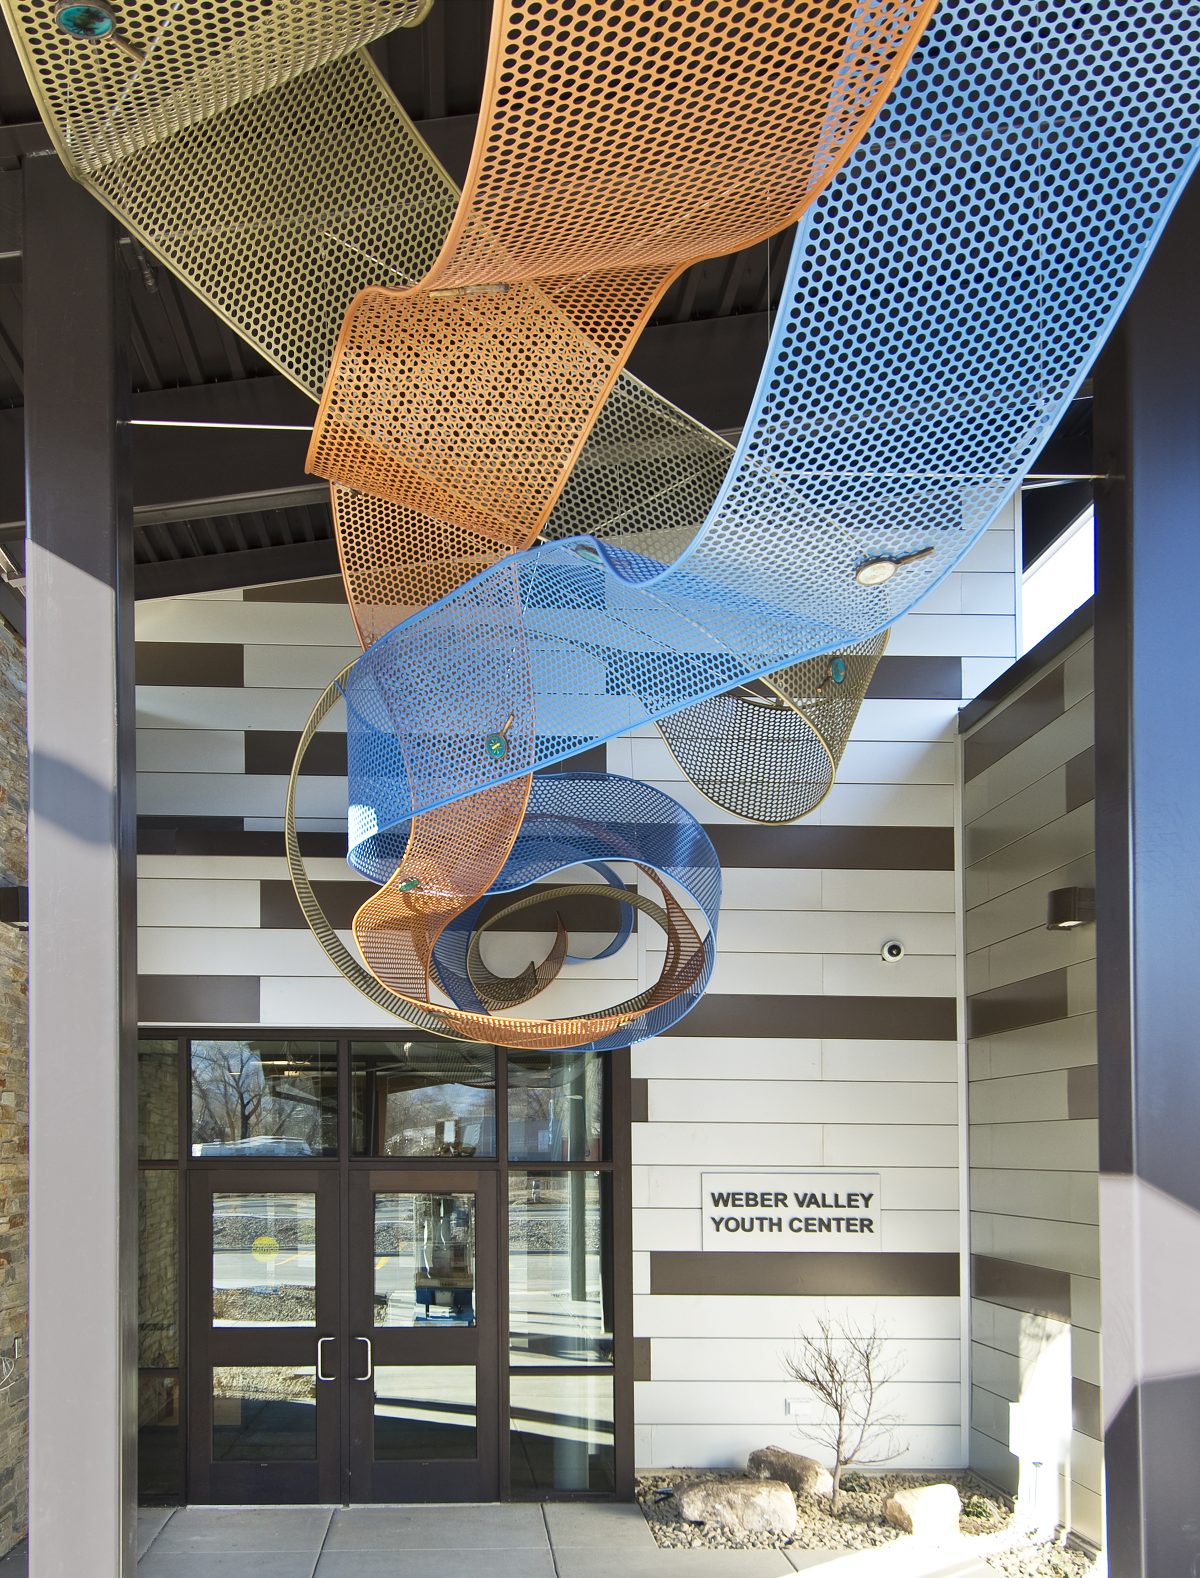 A image of an outdoor, metal sculpture resembling yellow, orange, and blue ribbons.